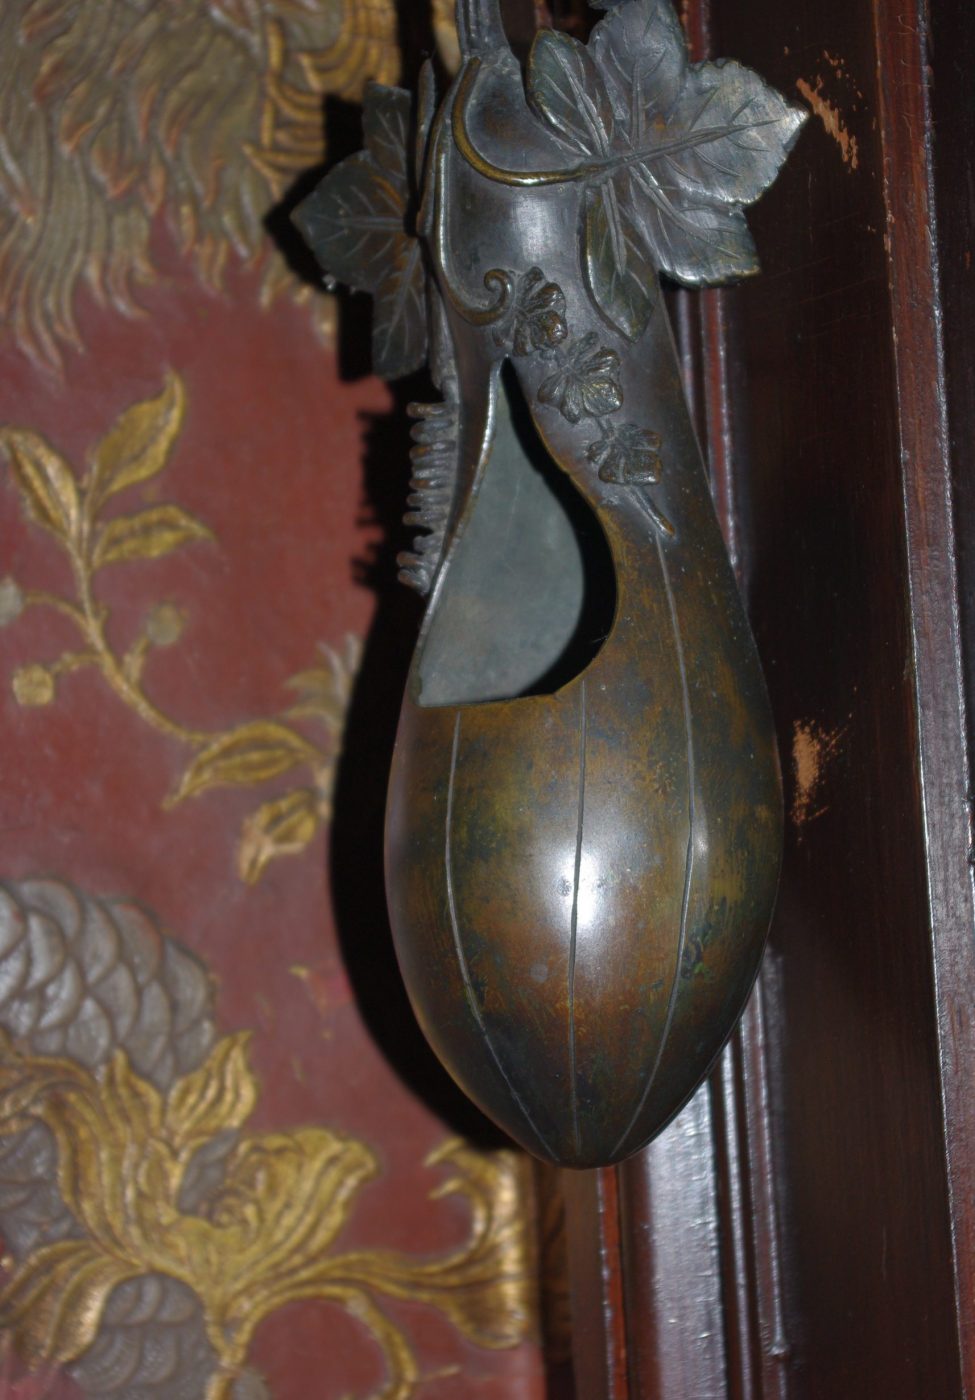 Gourd-Shaped Hanging Flower Vase c. 1895. Photographed in situ hanging in the front hall of Eldon House. Photo by S. Butlin.